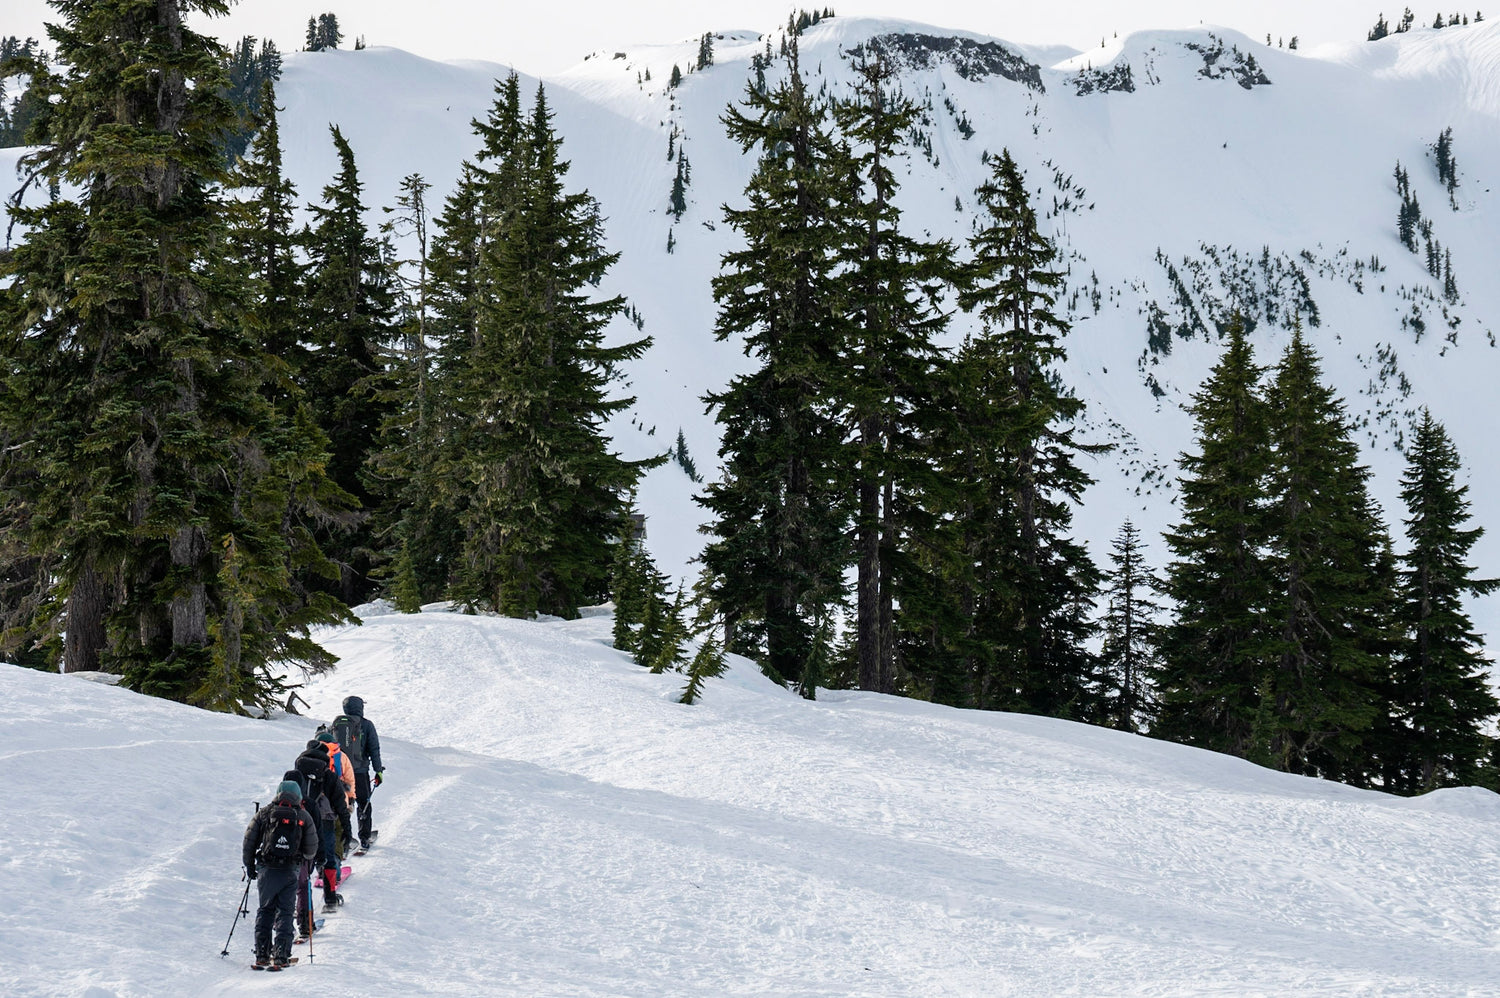 AIARE 1 students get experience traveling through terrain in the Mount Baker Backcountry. 